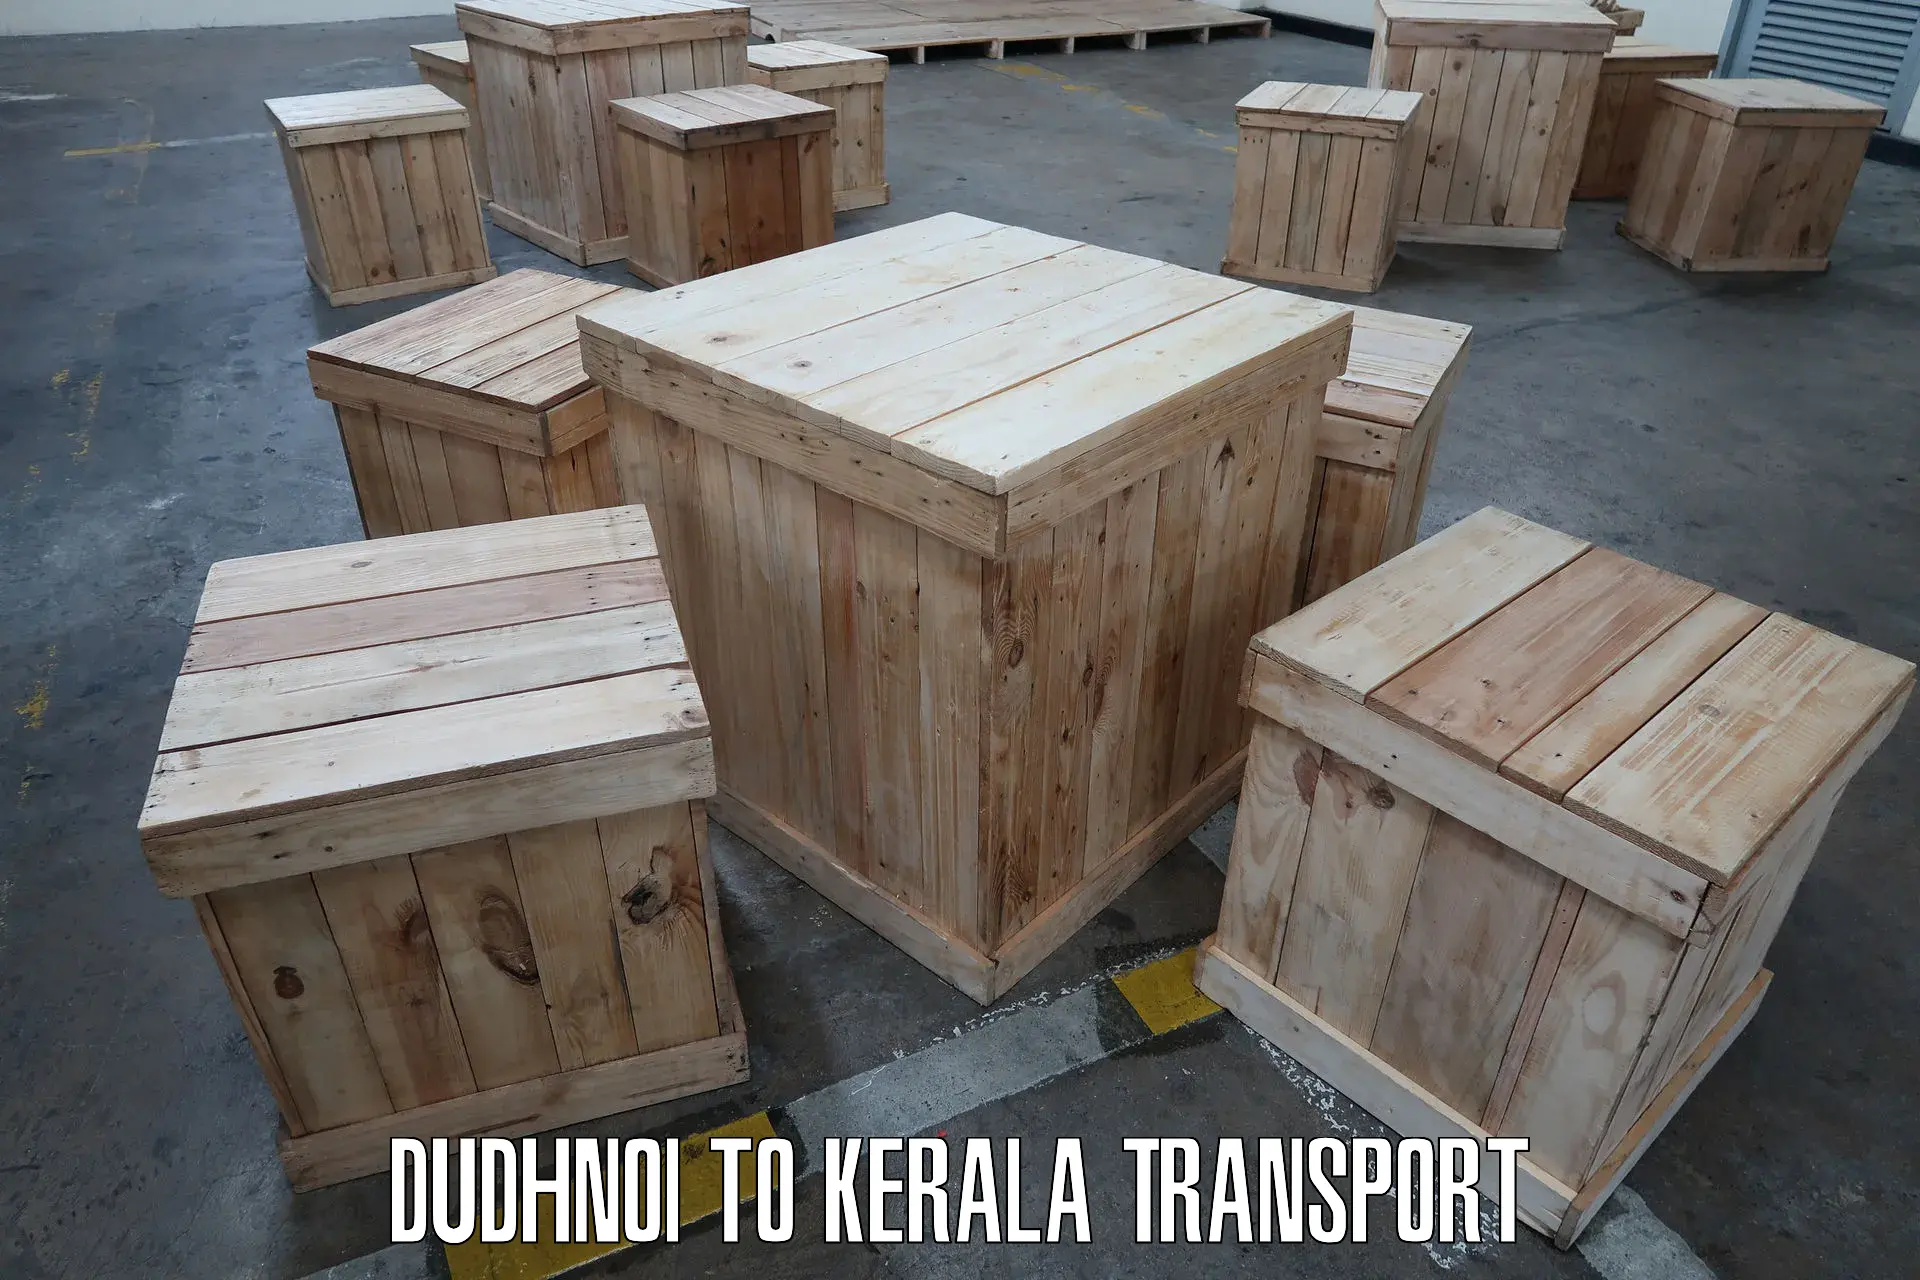 Part load transport service in India Dudhnoi to Kanhangad